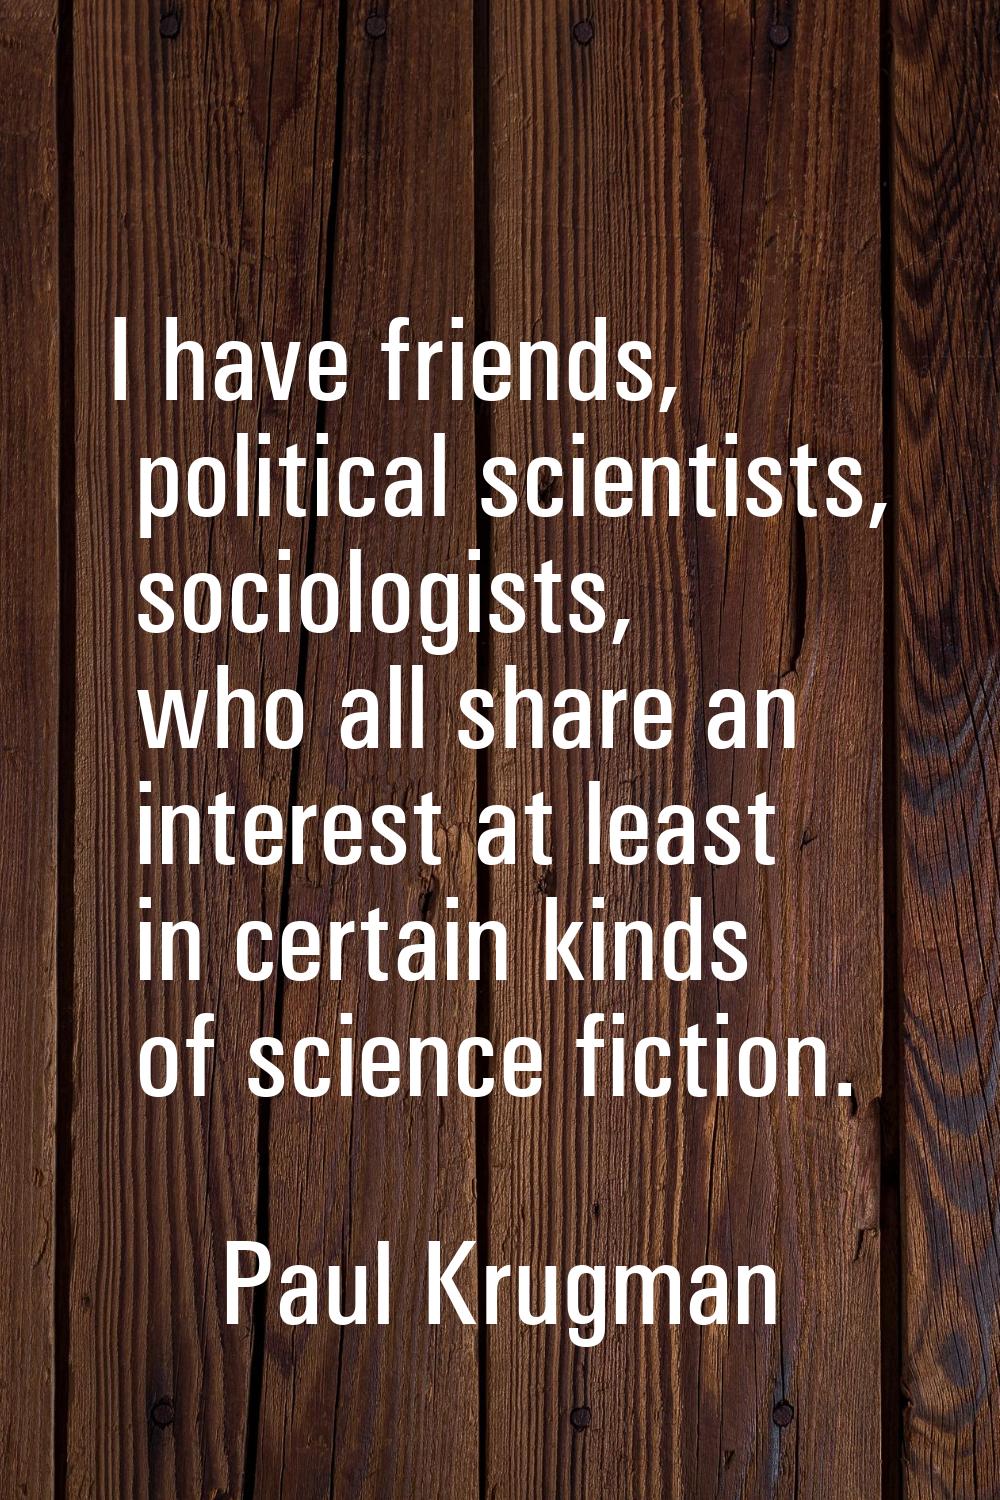 I have friends, political scientists, sociologists, who all share an interest at least in certain k